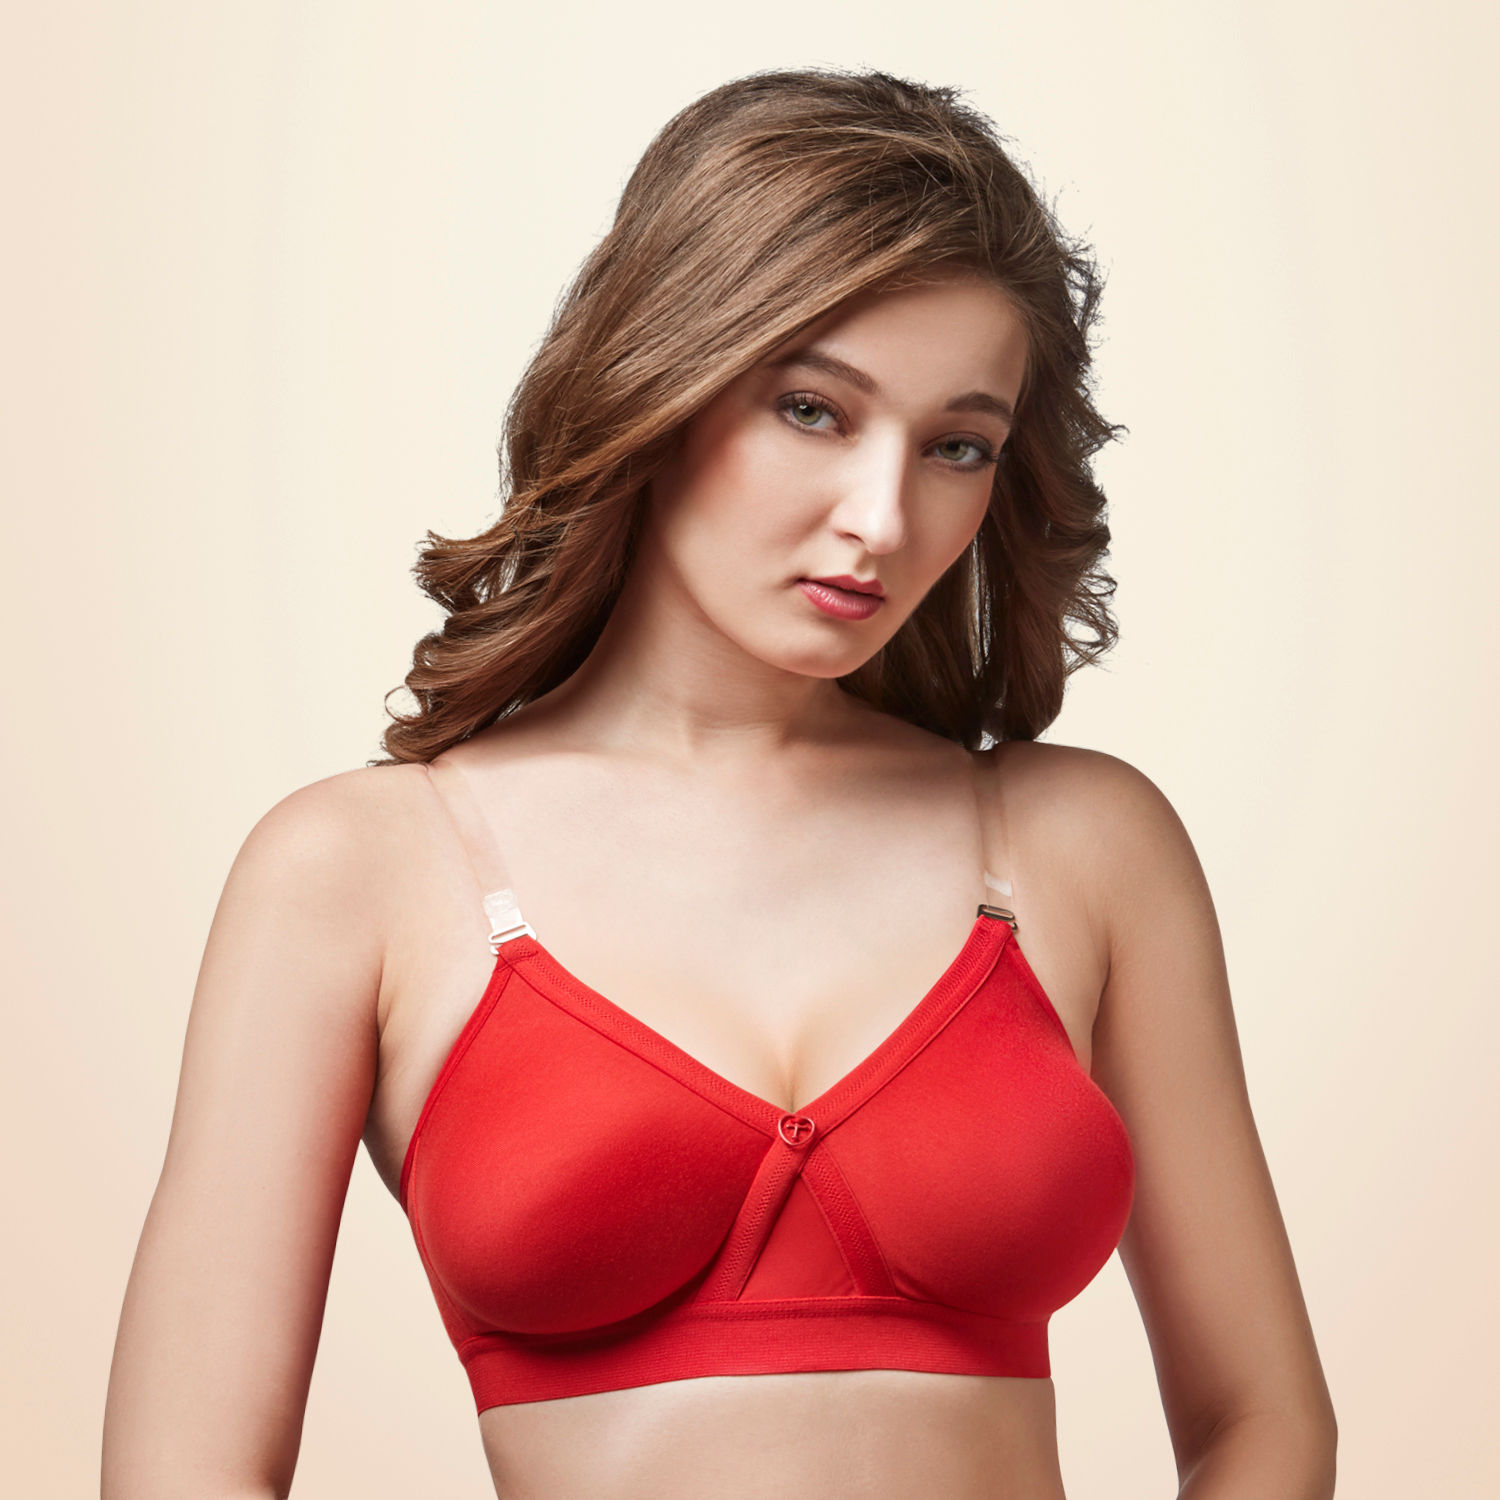 Buy Trylo Alpa Stp Women Non Wired Soft Full Cup Bra - White at Rs.470  online